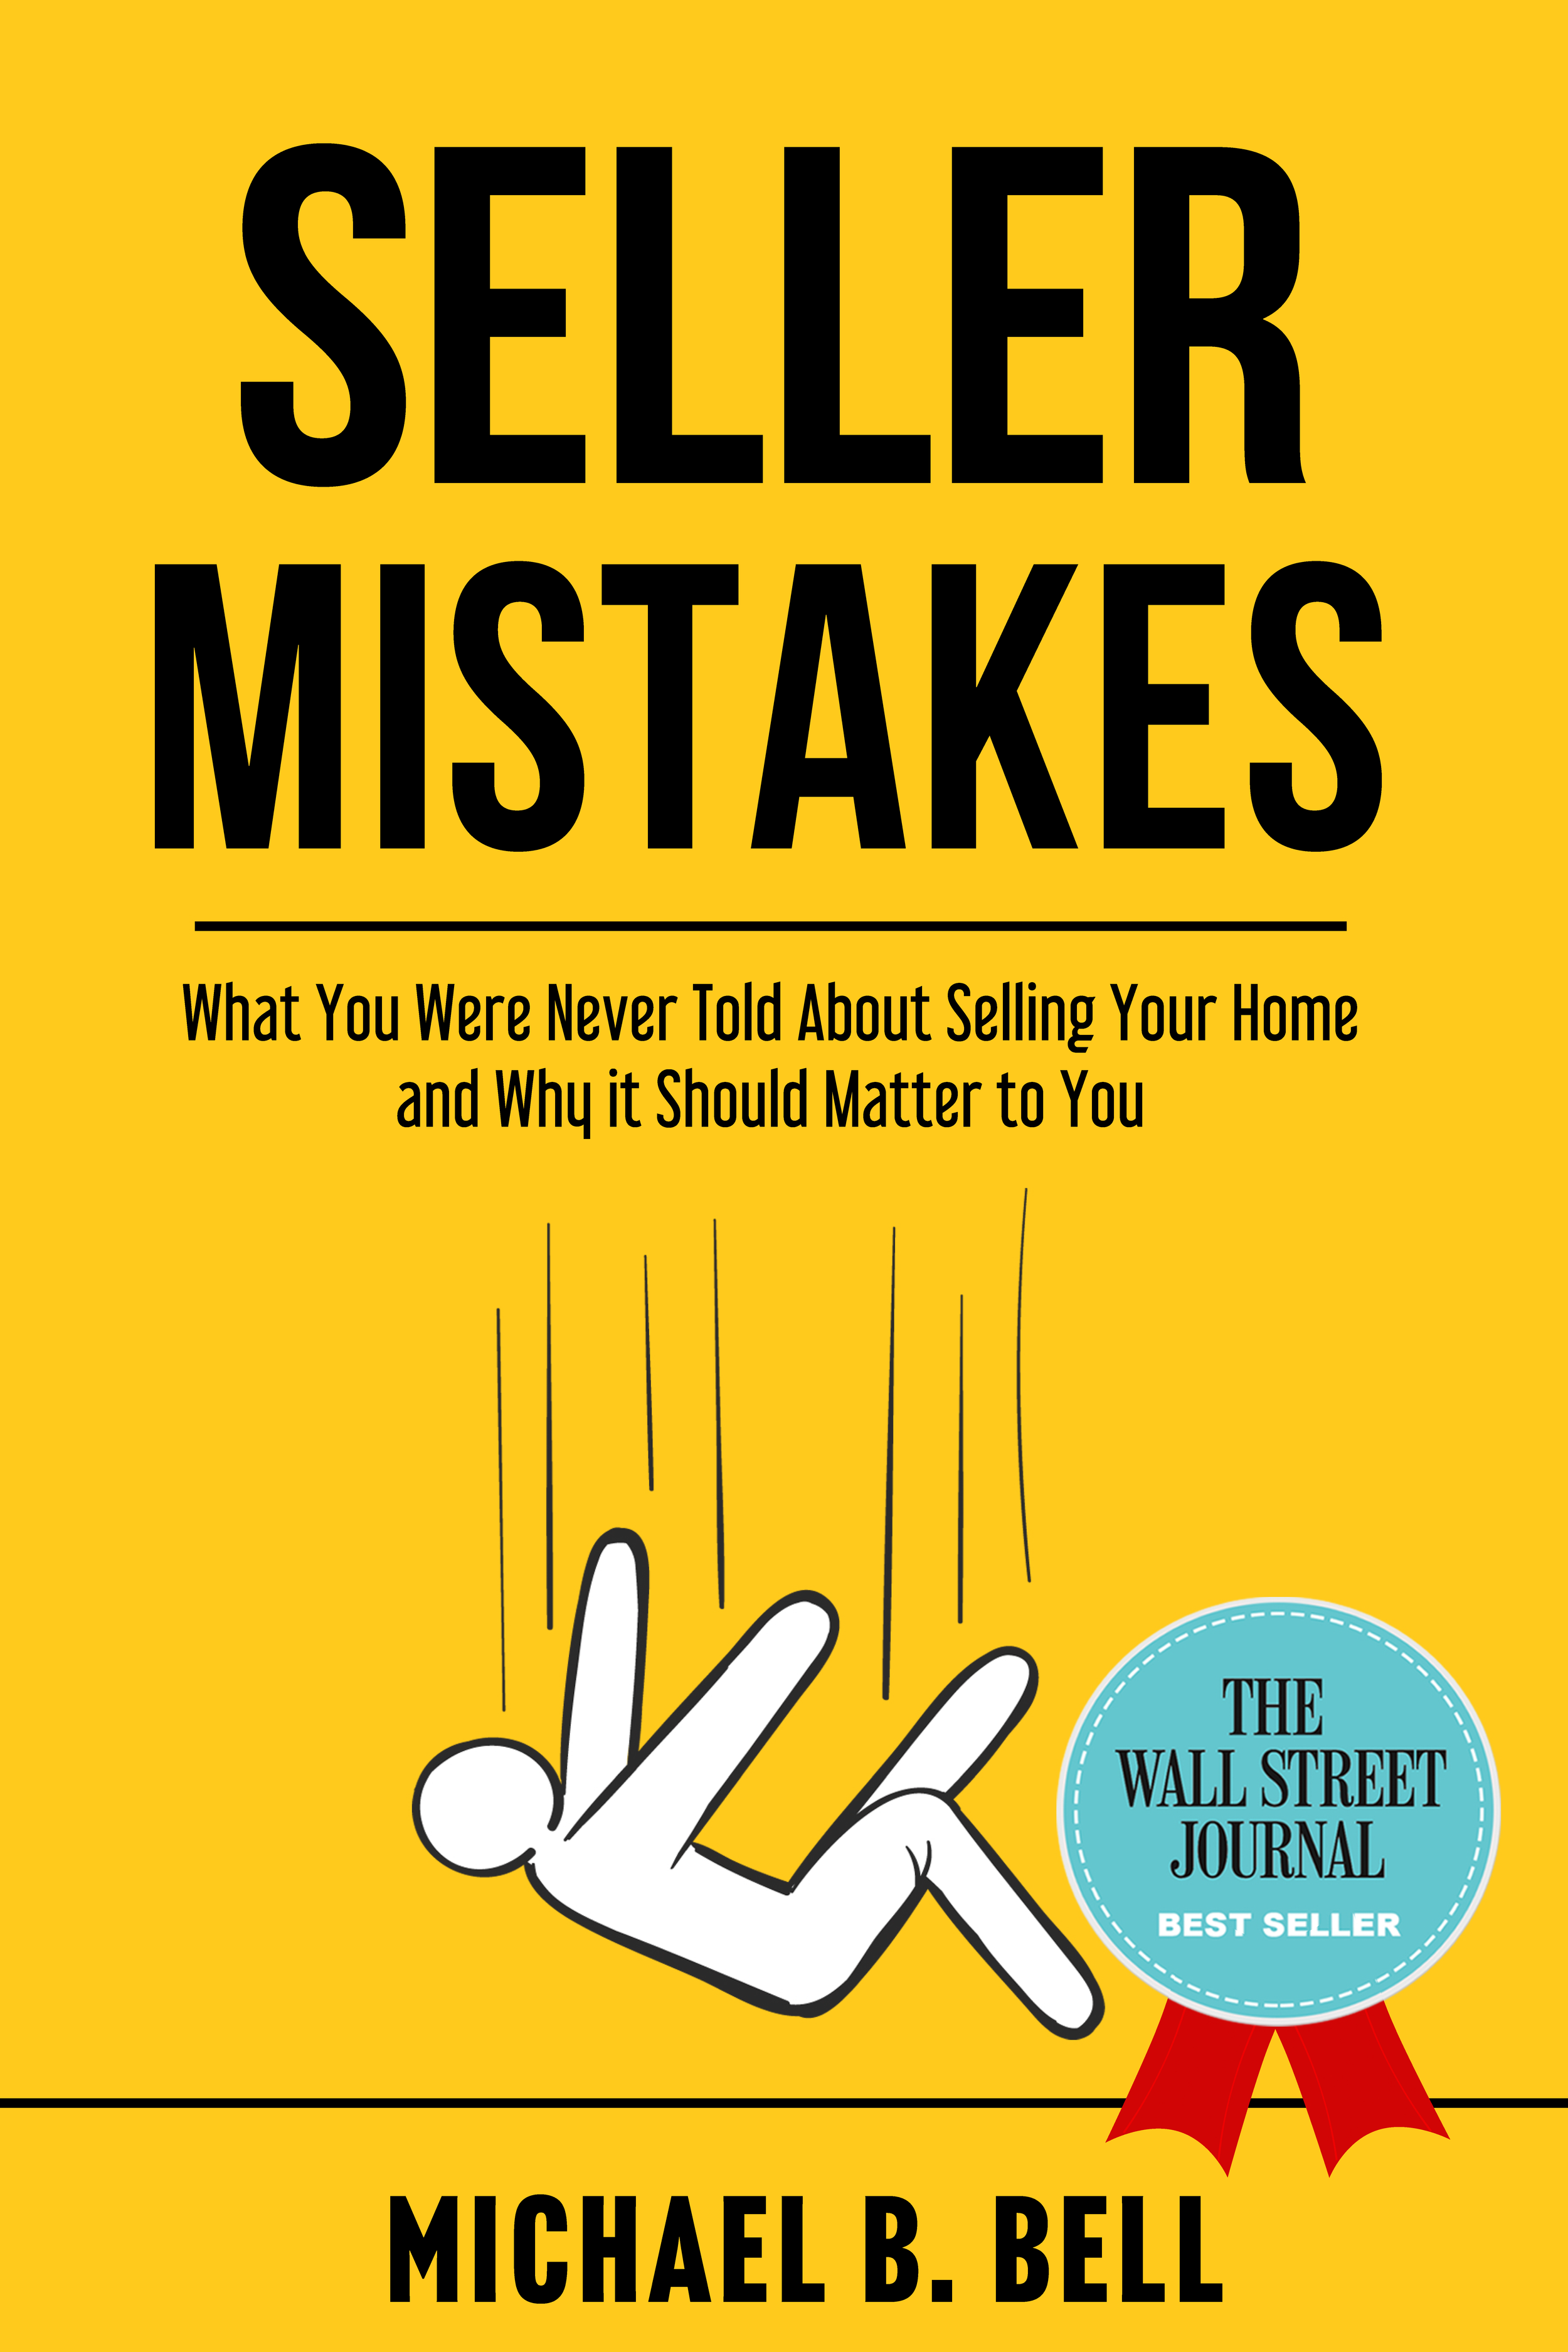 Seller Mistakes_Front Cover MOCKUP.png